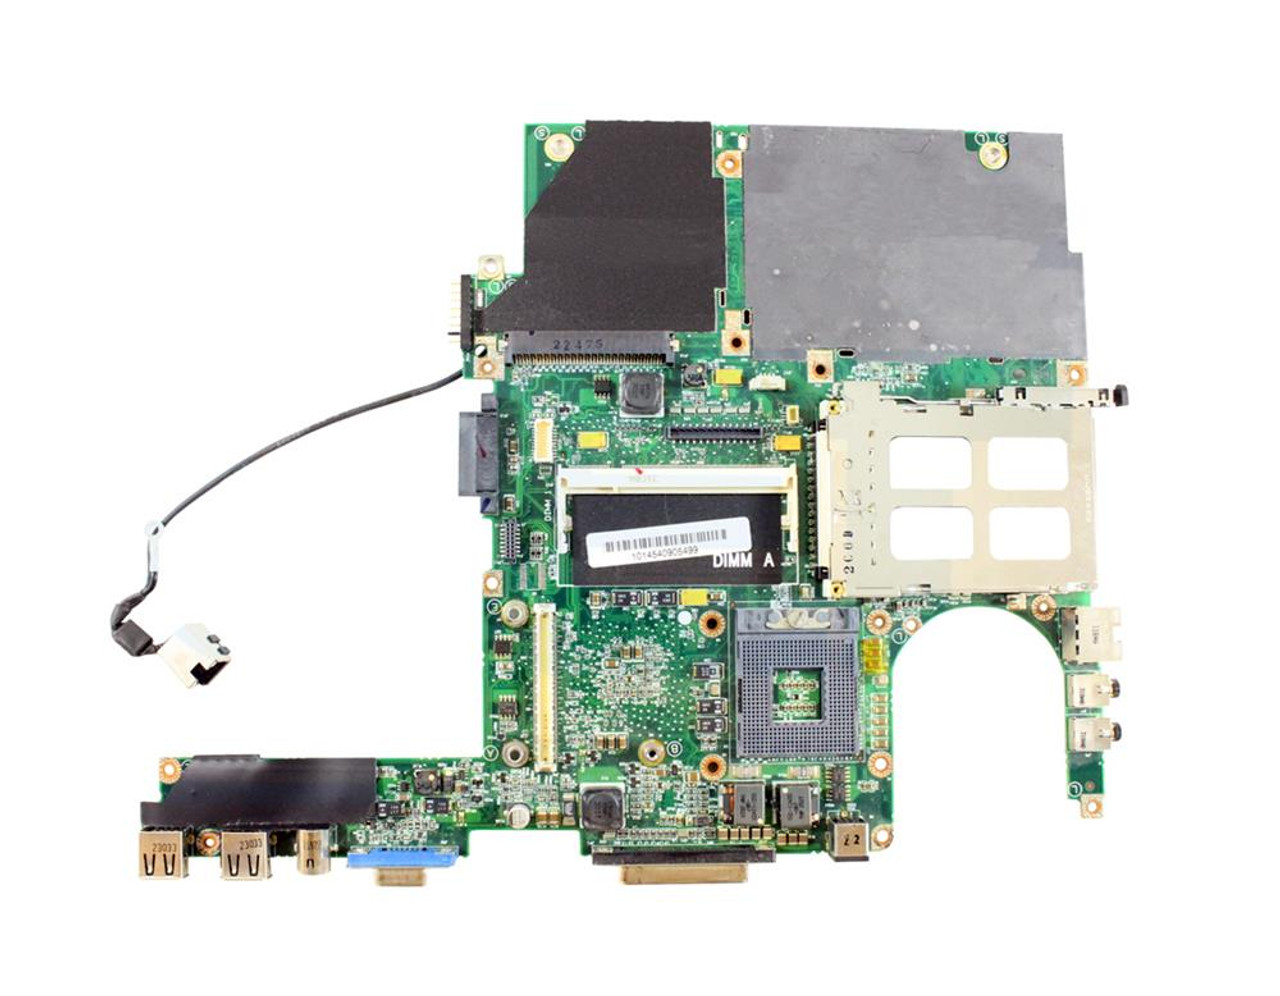 08N816 Dell System Board (Motherboard) for Inspiron 2650 (Refurbished)